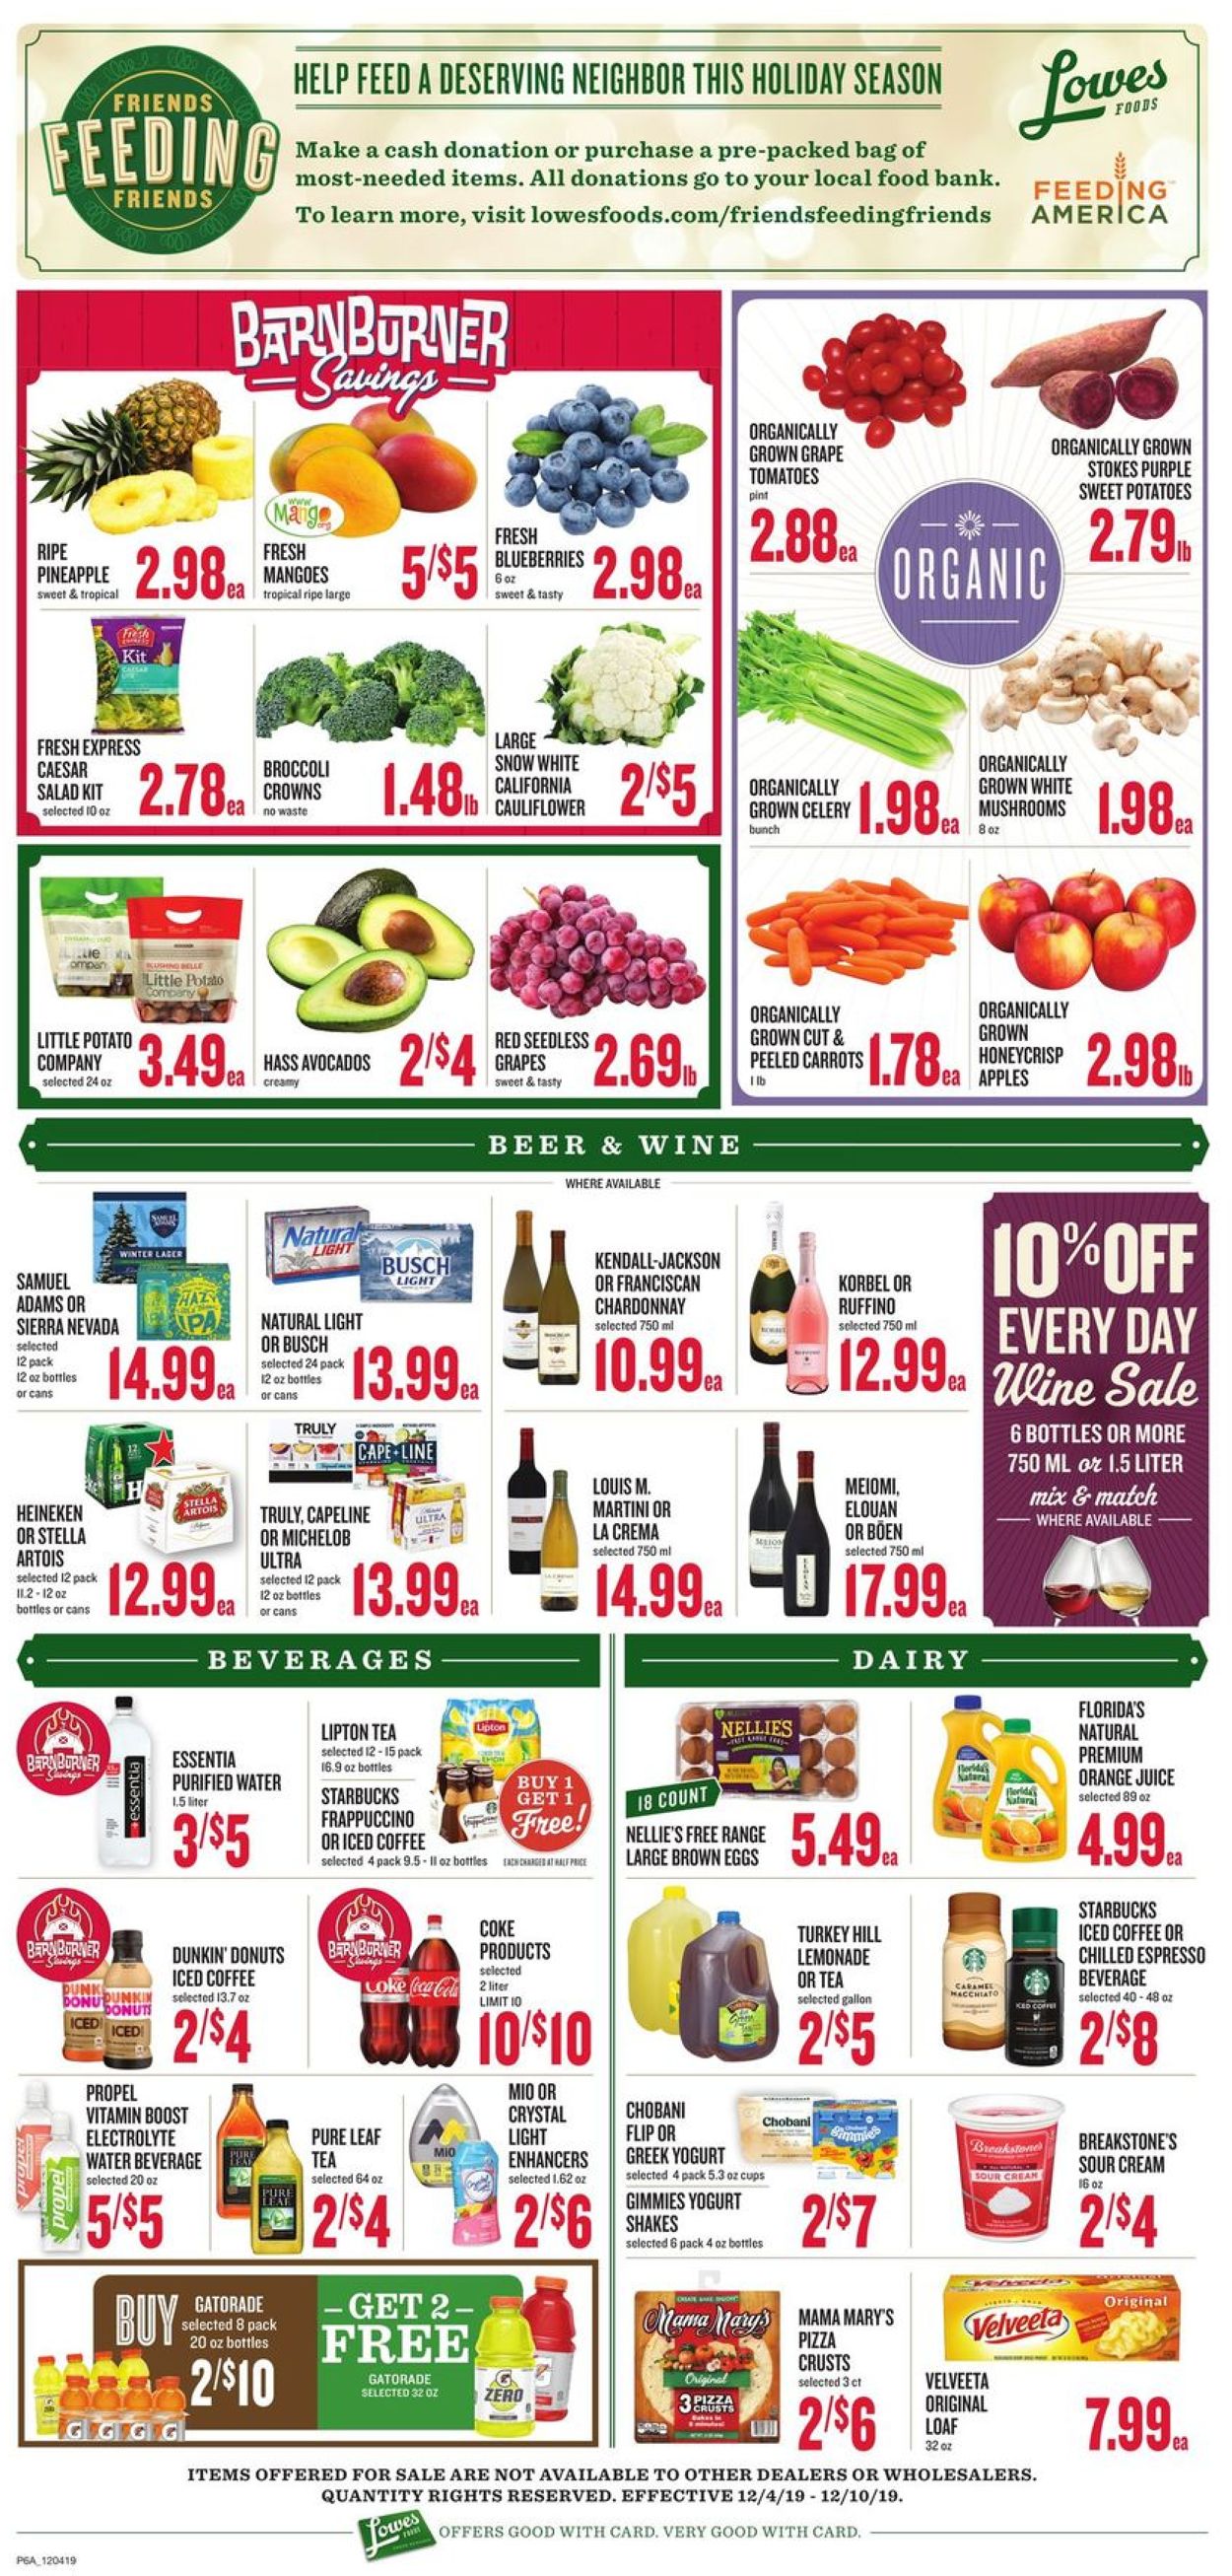 Lowes Foods - Holidays Ad 2019 Weekly Ad Circular - valid 12/04-12/10/2019 (Page 10)